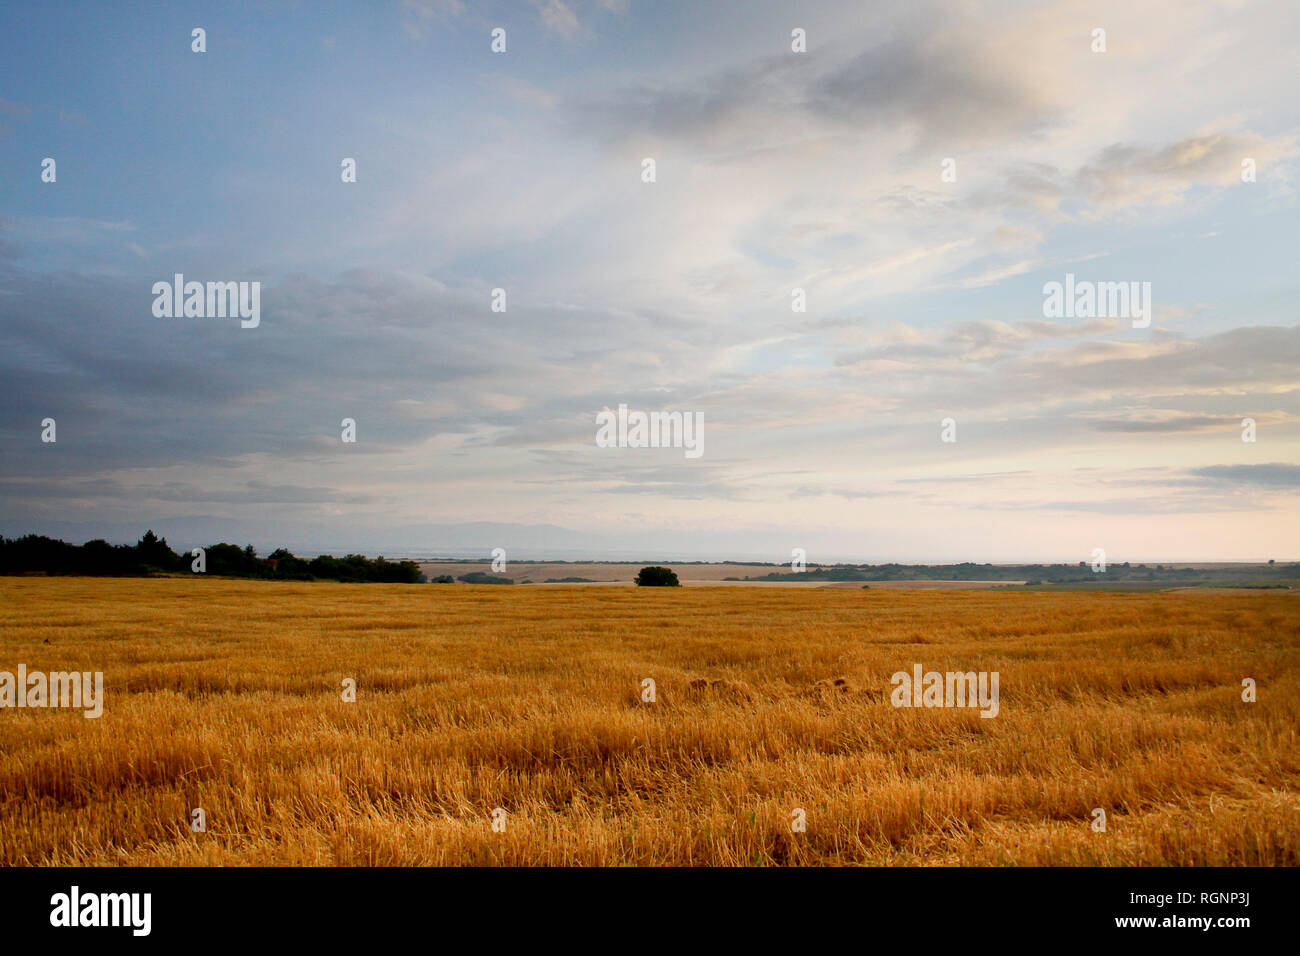 Dramatic agricultural landscape with cut wheat fields and clouds, Bulgaria Stock Photo